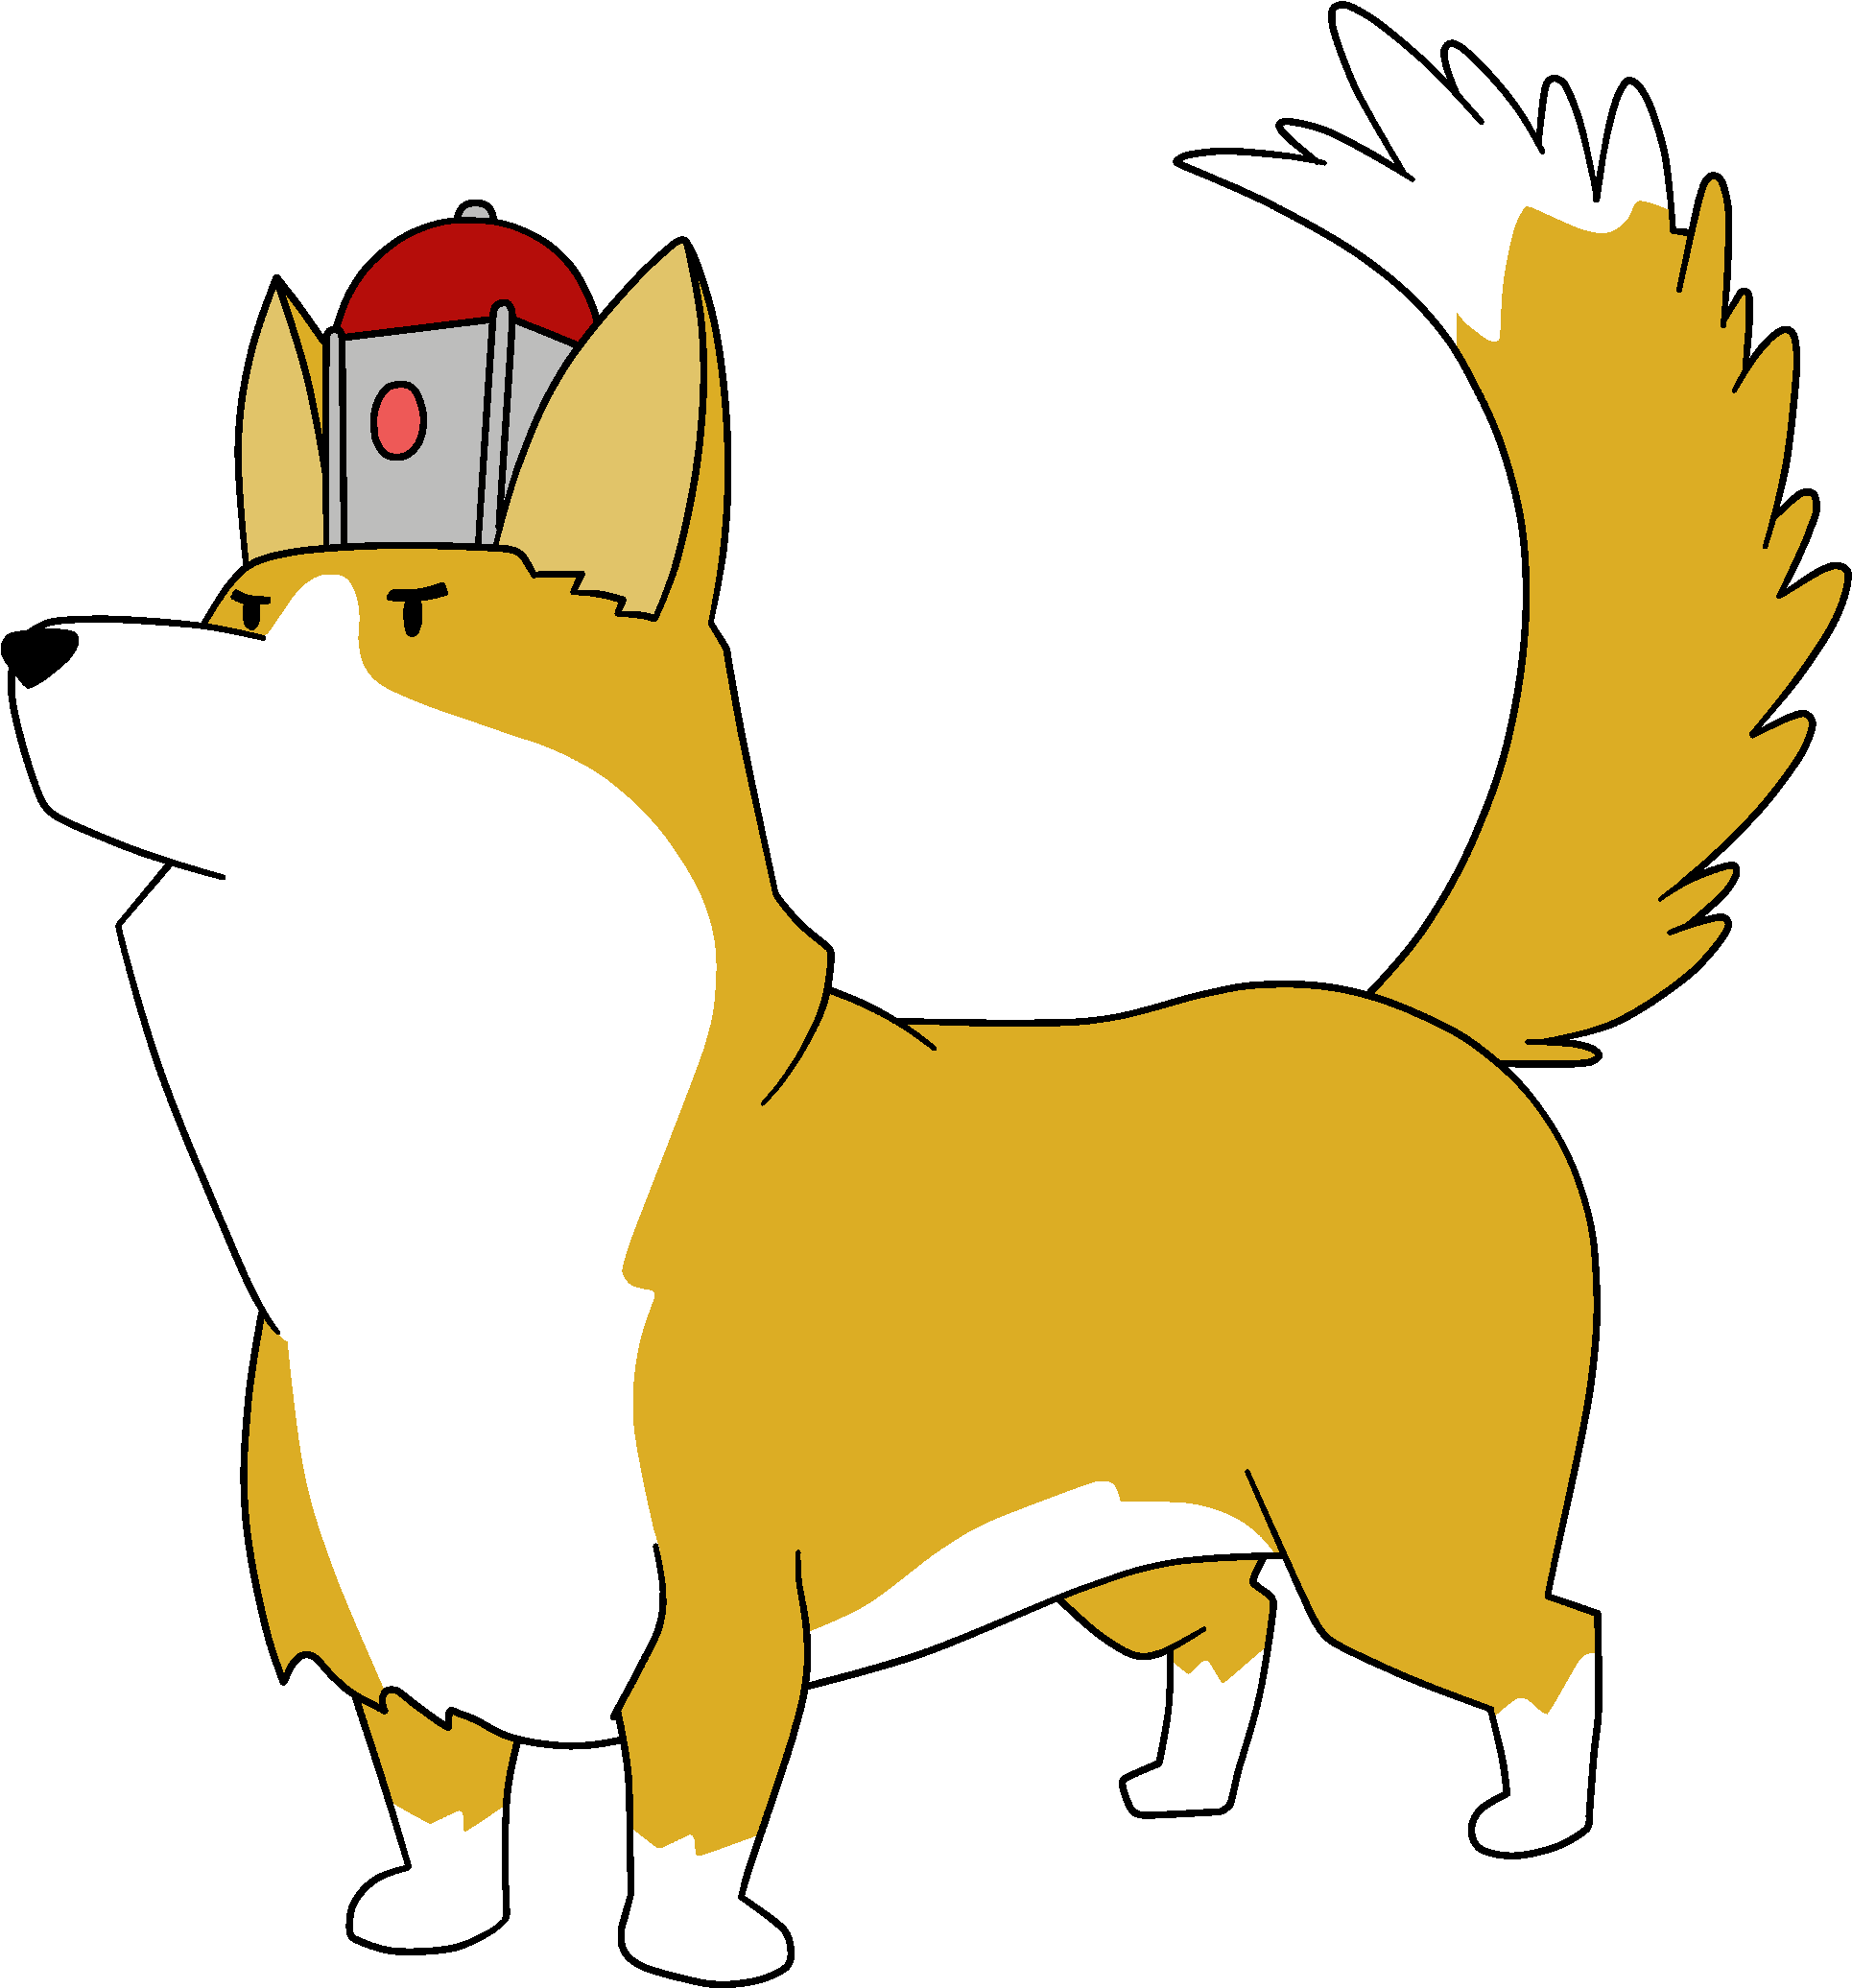 A Cartoon Of A Dog With A Hat On